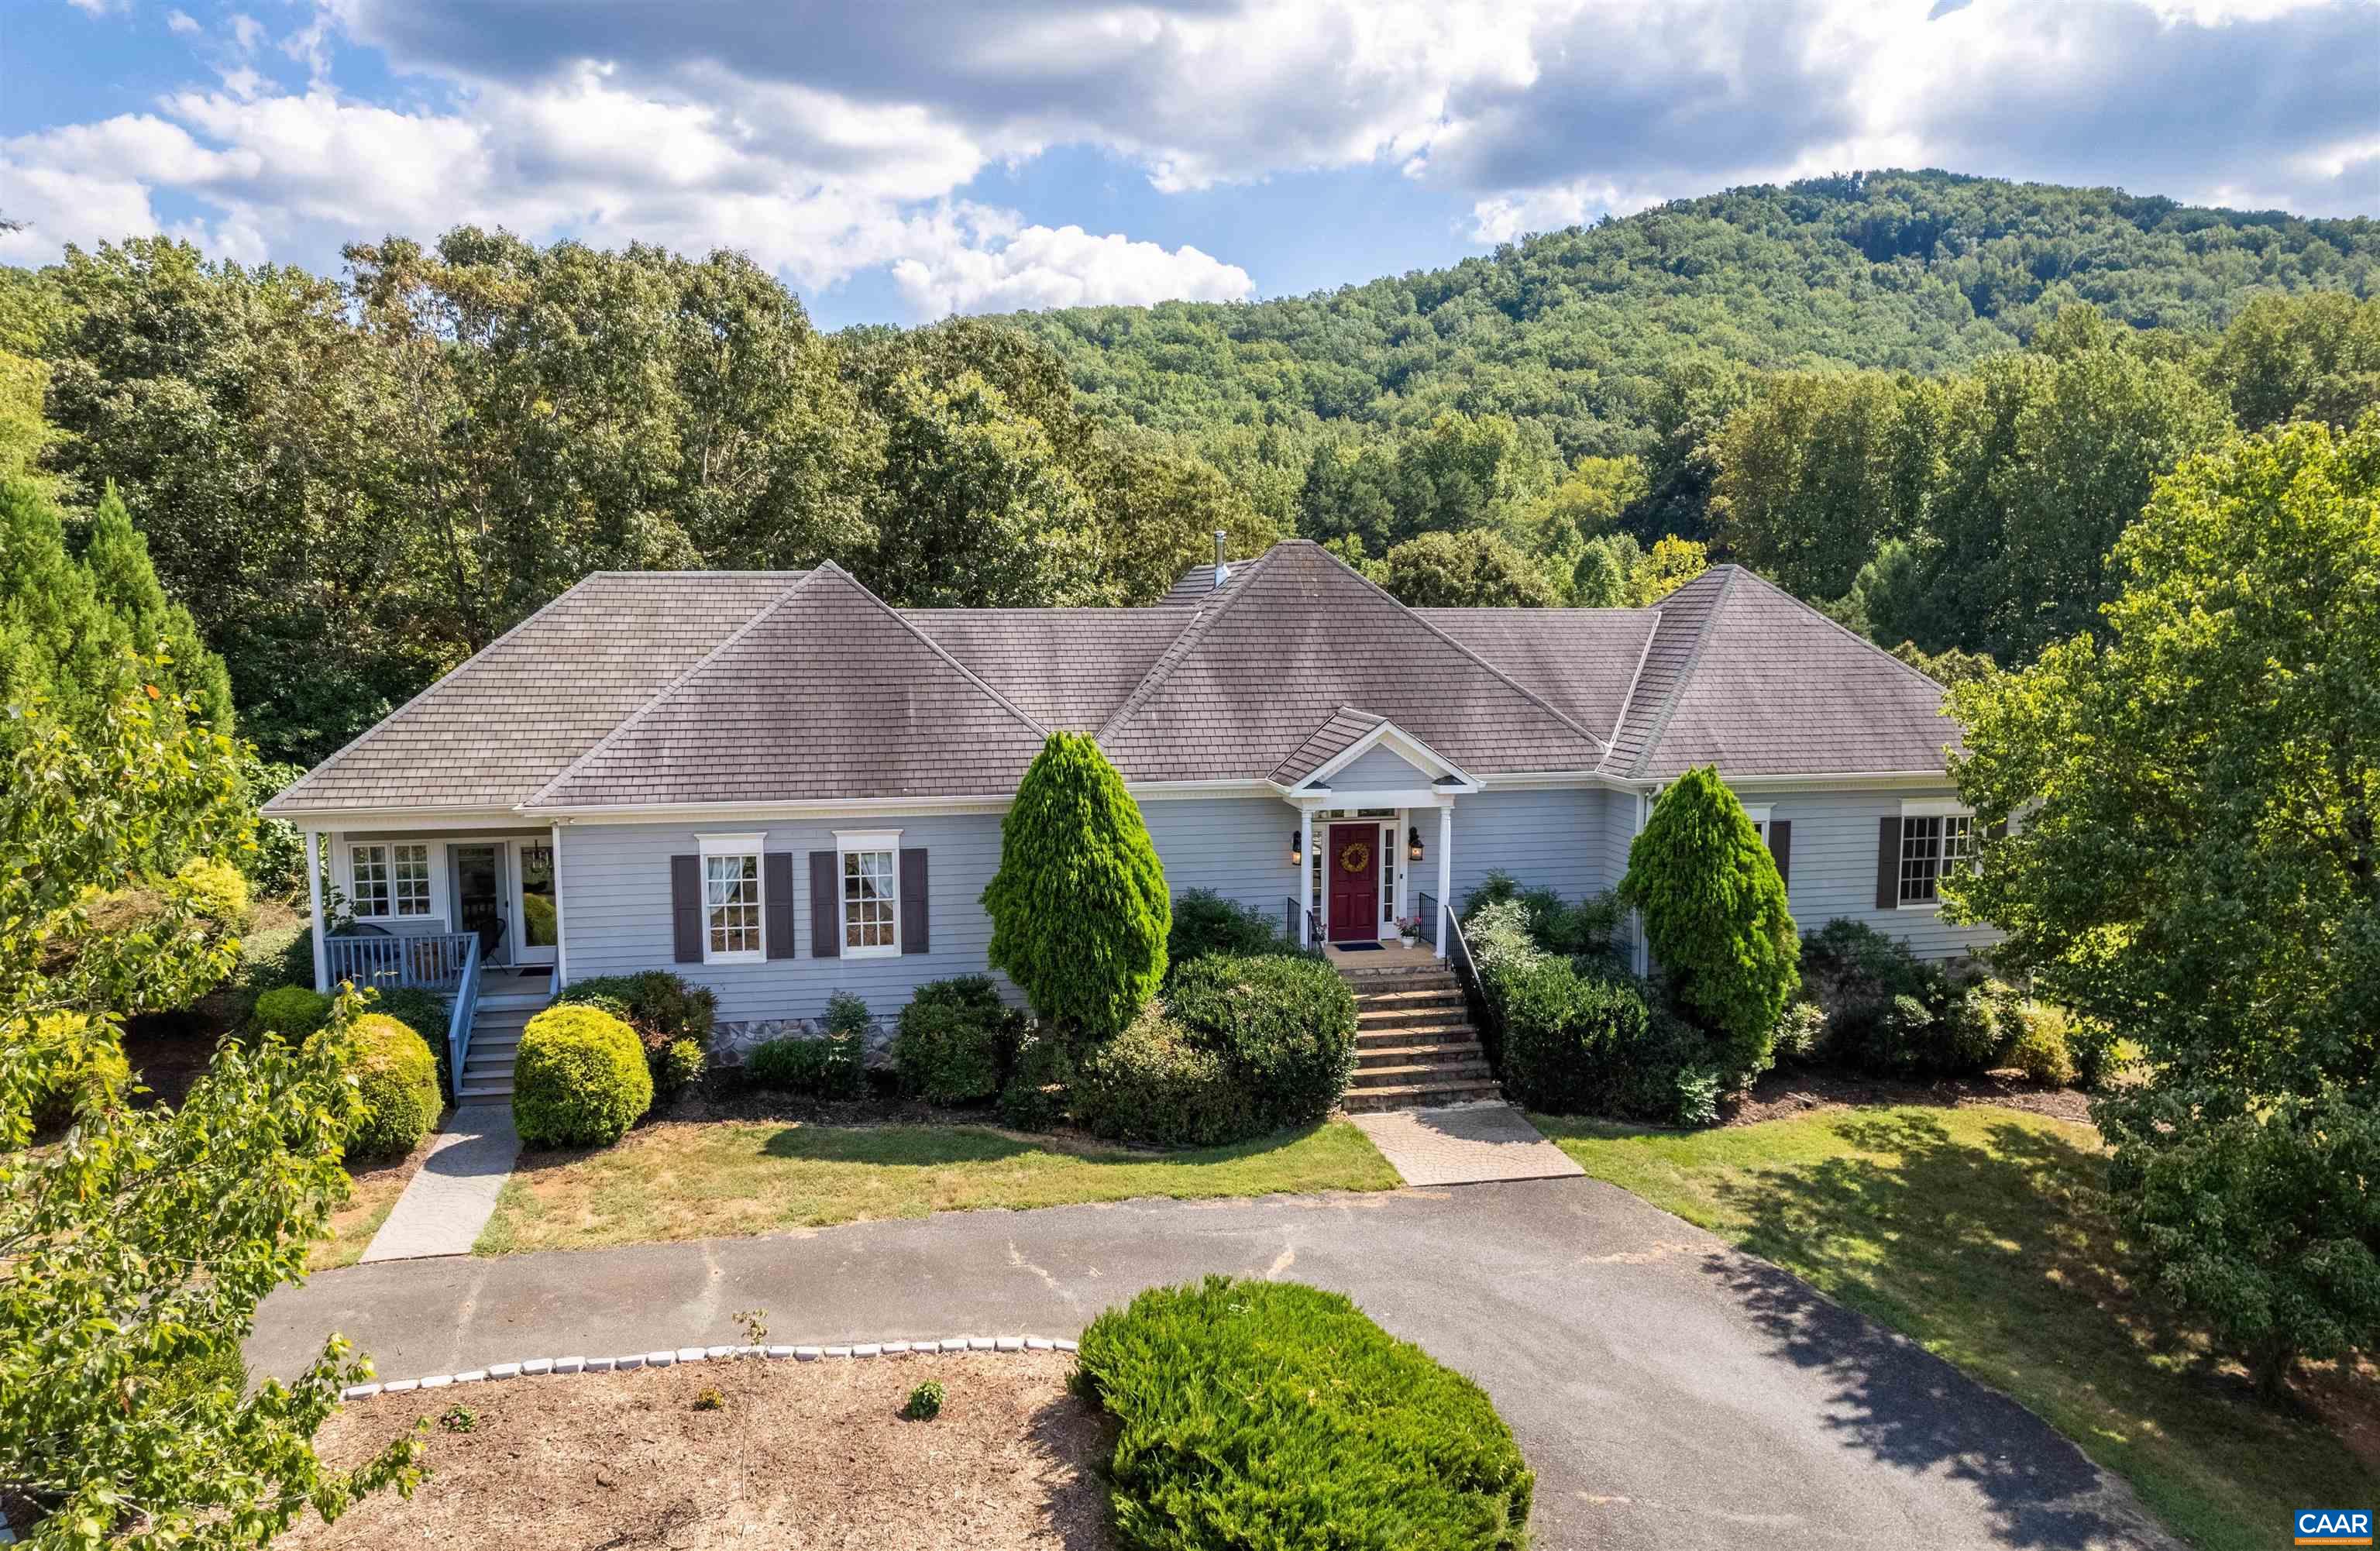 OPEN HOUSE, Sunday, 9/24, 1:00-3:00. Country living at its best just down the road from the delightful Batesville Market in the quaint historic village and minutes from Crozet shopping, schools & restaurants. Builder's own custom built home w/ one level living has been updated & improved in recent years. Features include: main level owner's suite, finished terrace level, detached studio/office, lovely gardens & chicken coop, just to name a few! Gorgeous hardwood floors, extensive moldings & thoughtful details throughout. The central great room has wood burning FP w/ slate surround. Gourmet kitchen features white cabinets, granite countertops & stainless appliances. Light-filled sunroom & huge screened porch w/ stunning mountain views perfect for entertaining or relaxing w/ your favorite book. The spacious owner's suite offers private ensuite bathroom and walk-in closet. Two additional bedrooms and a full bath on the main level. Terrace level is finished and features a huge rec room w/ custom built-ins & luxury vinyl flooring that leads to two additional bedrooms & full bath, plus laundry and oversized 2 car garage w/ tons of storage. 3rd garage space is attached to the separate studio/cottage.